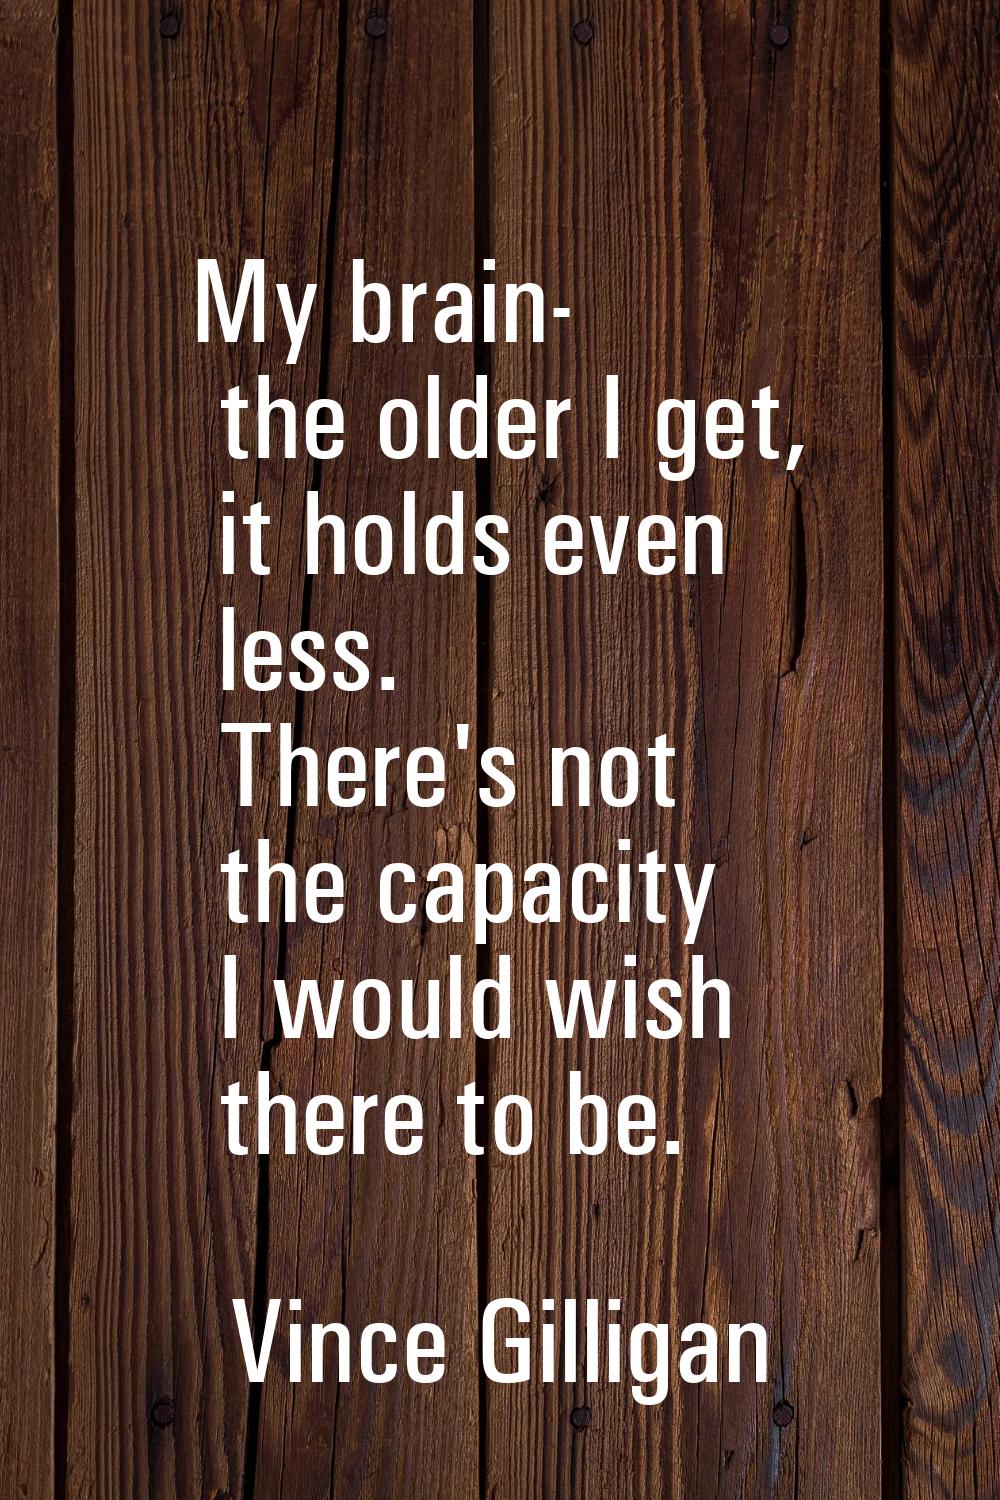 My brain- the older I get, it holds even less. There's not the capacity I would wish there to be.